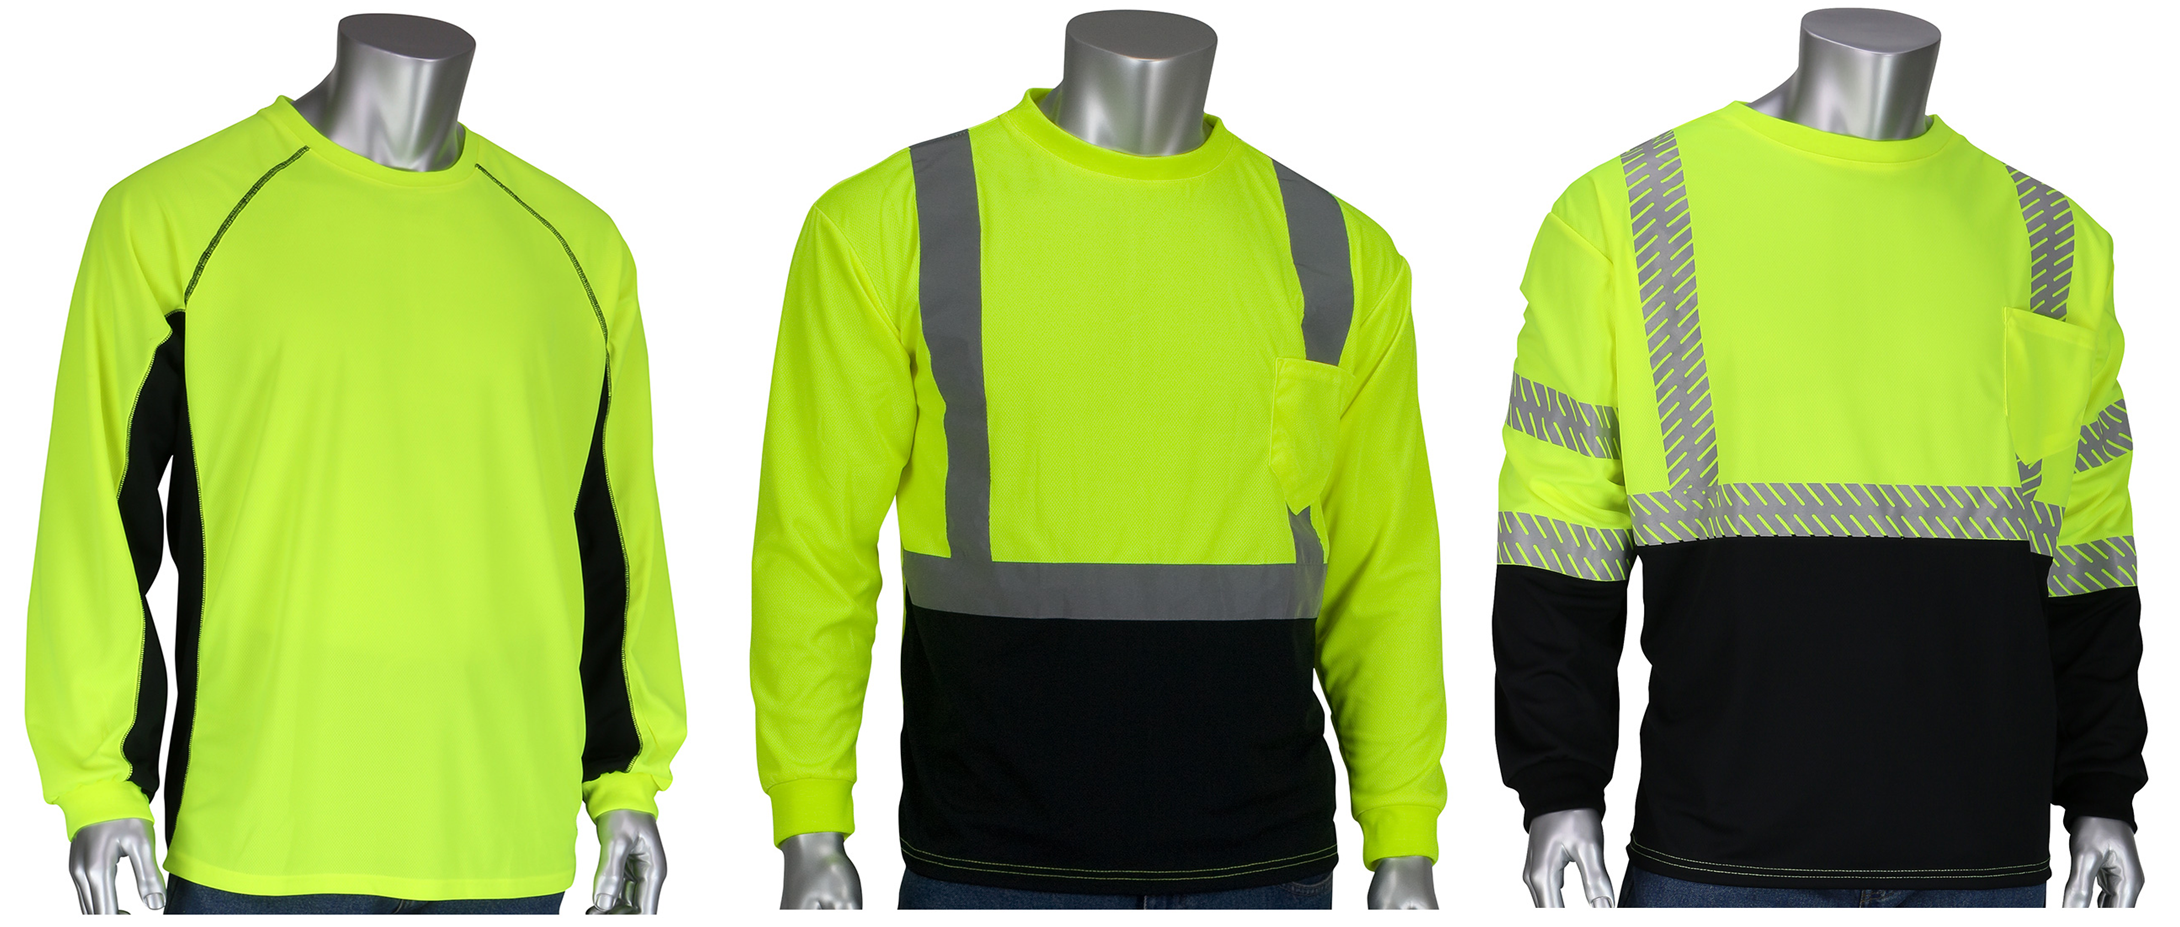 Hi-Viz Sun Blocking T-Shirts with Built-In Insect Repellent